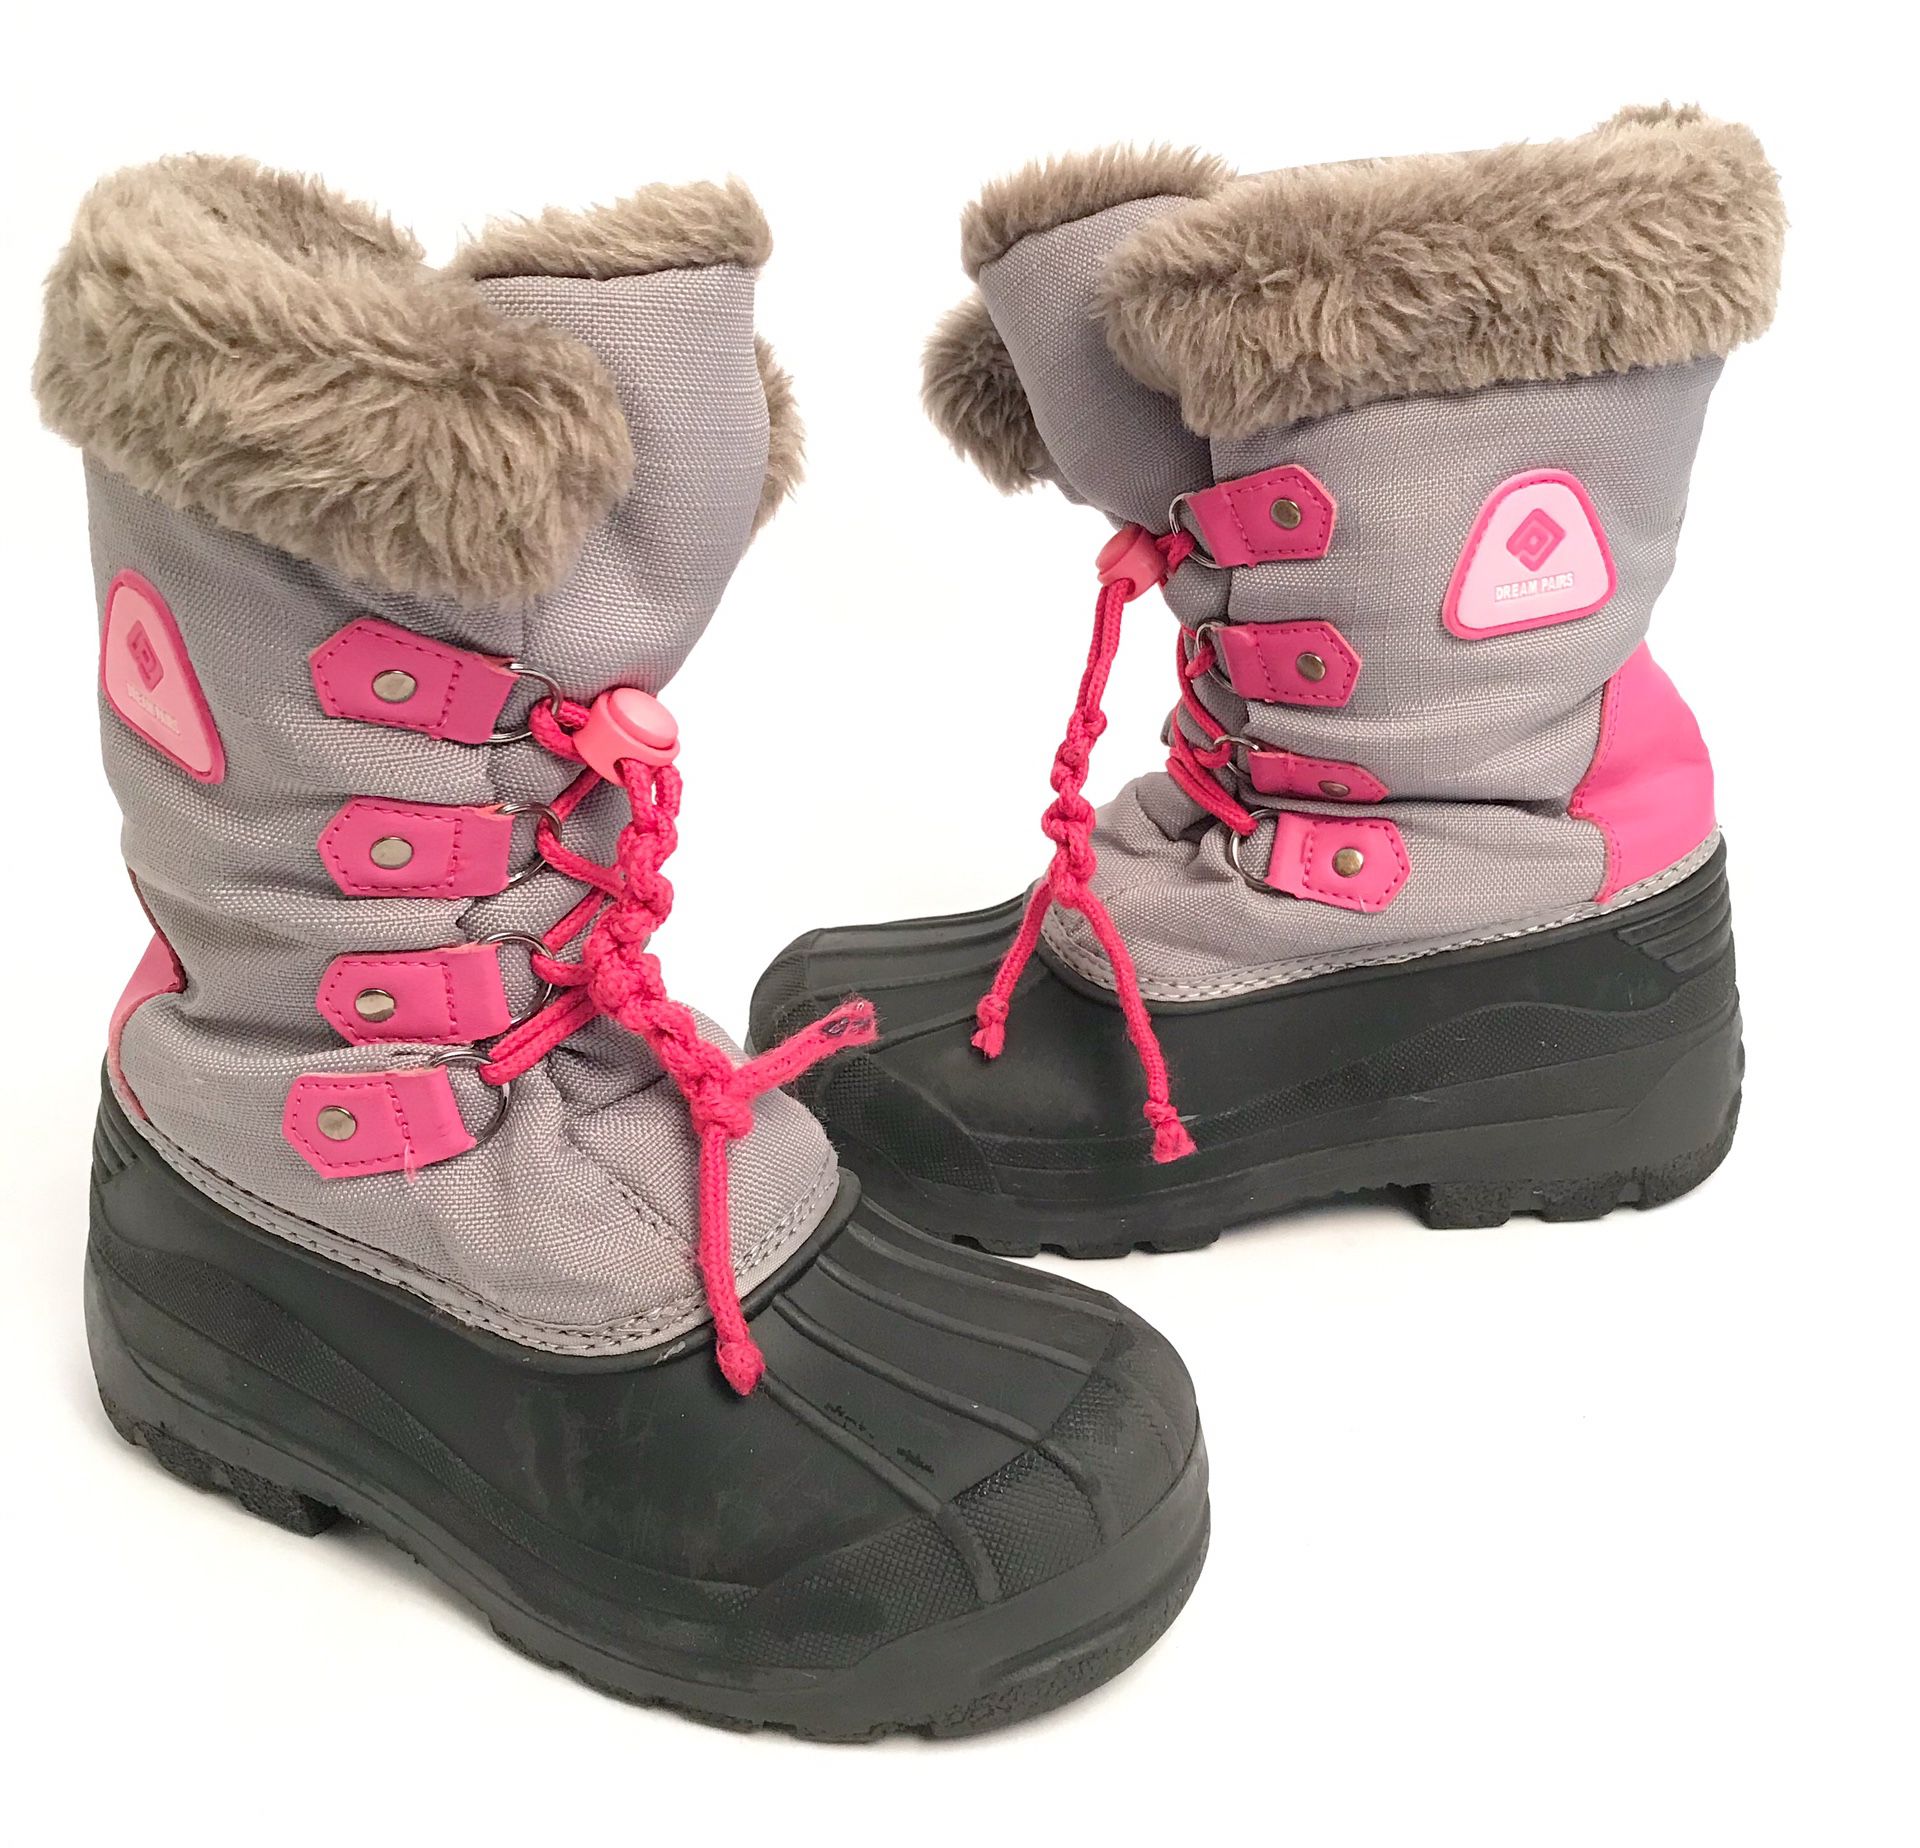 DREAM PAIRS Boots Girls Winter Snow Boots Sz 3 Waterproof Thinsulate